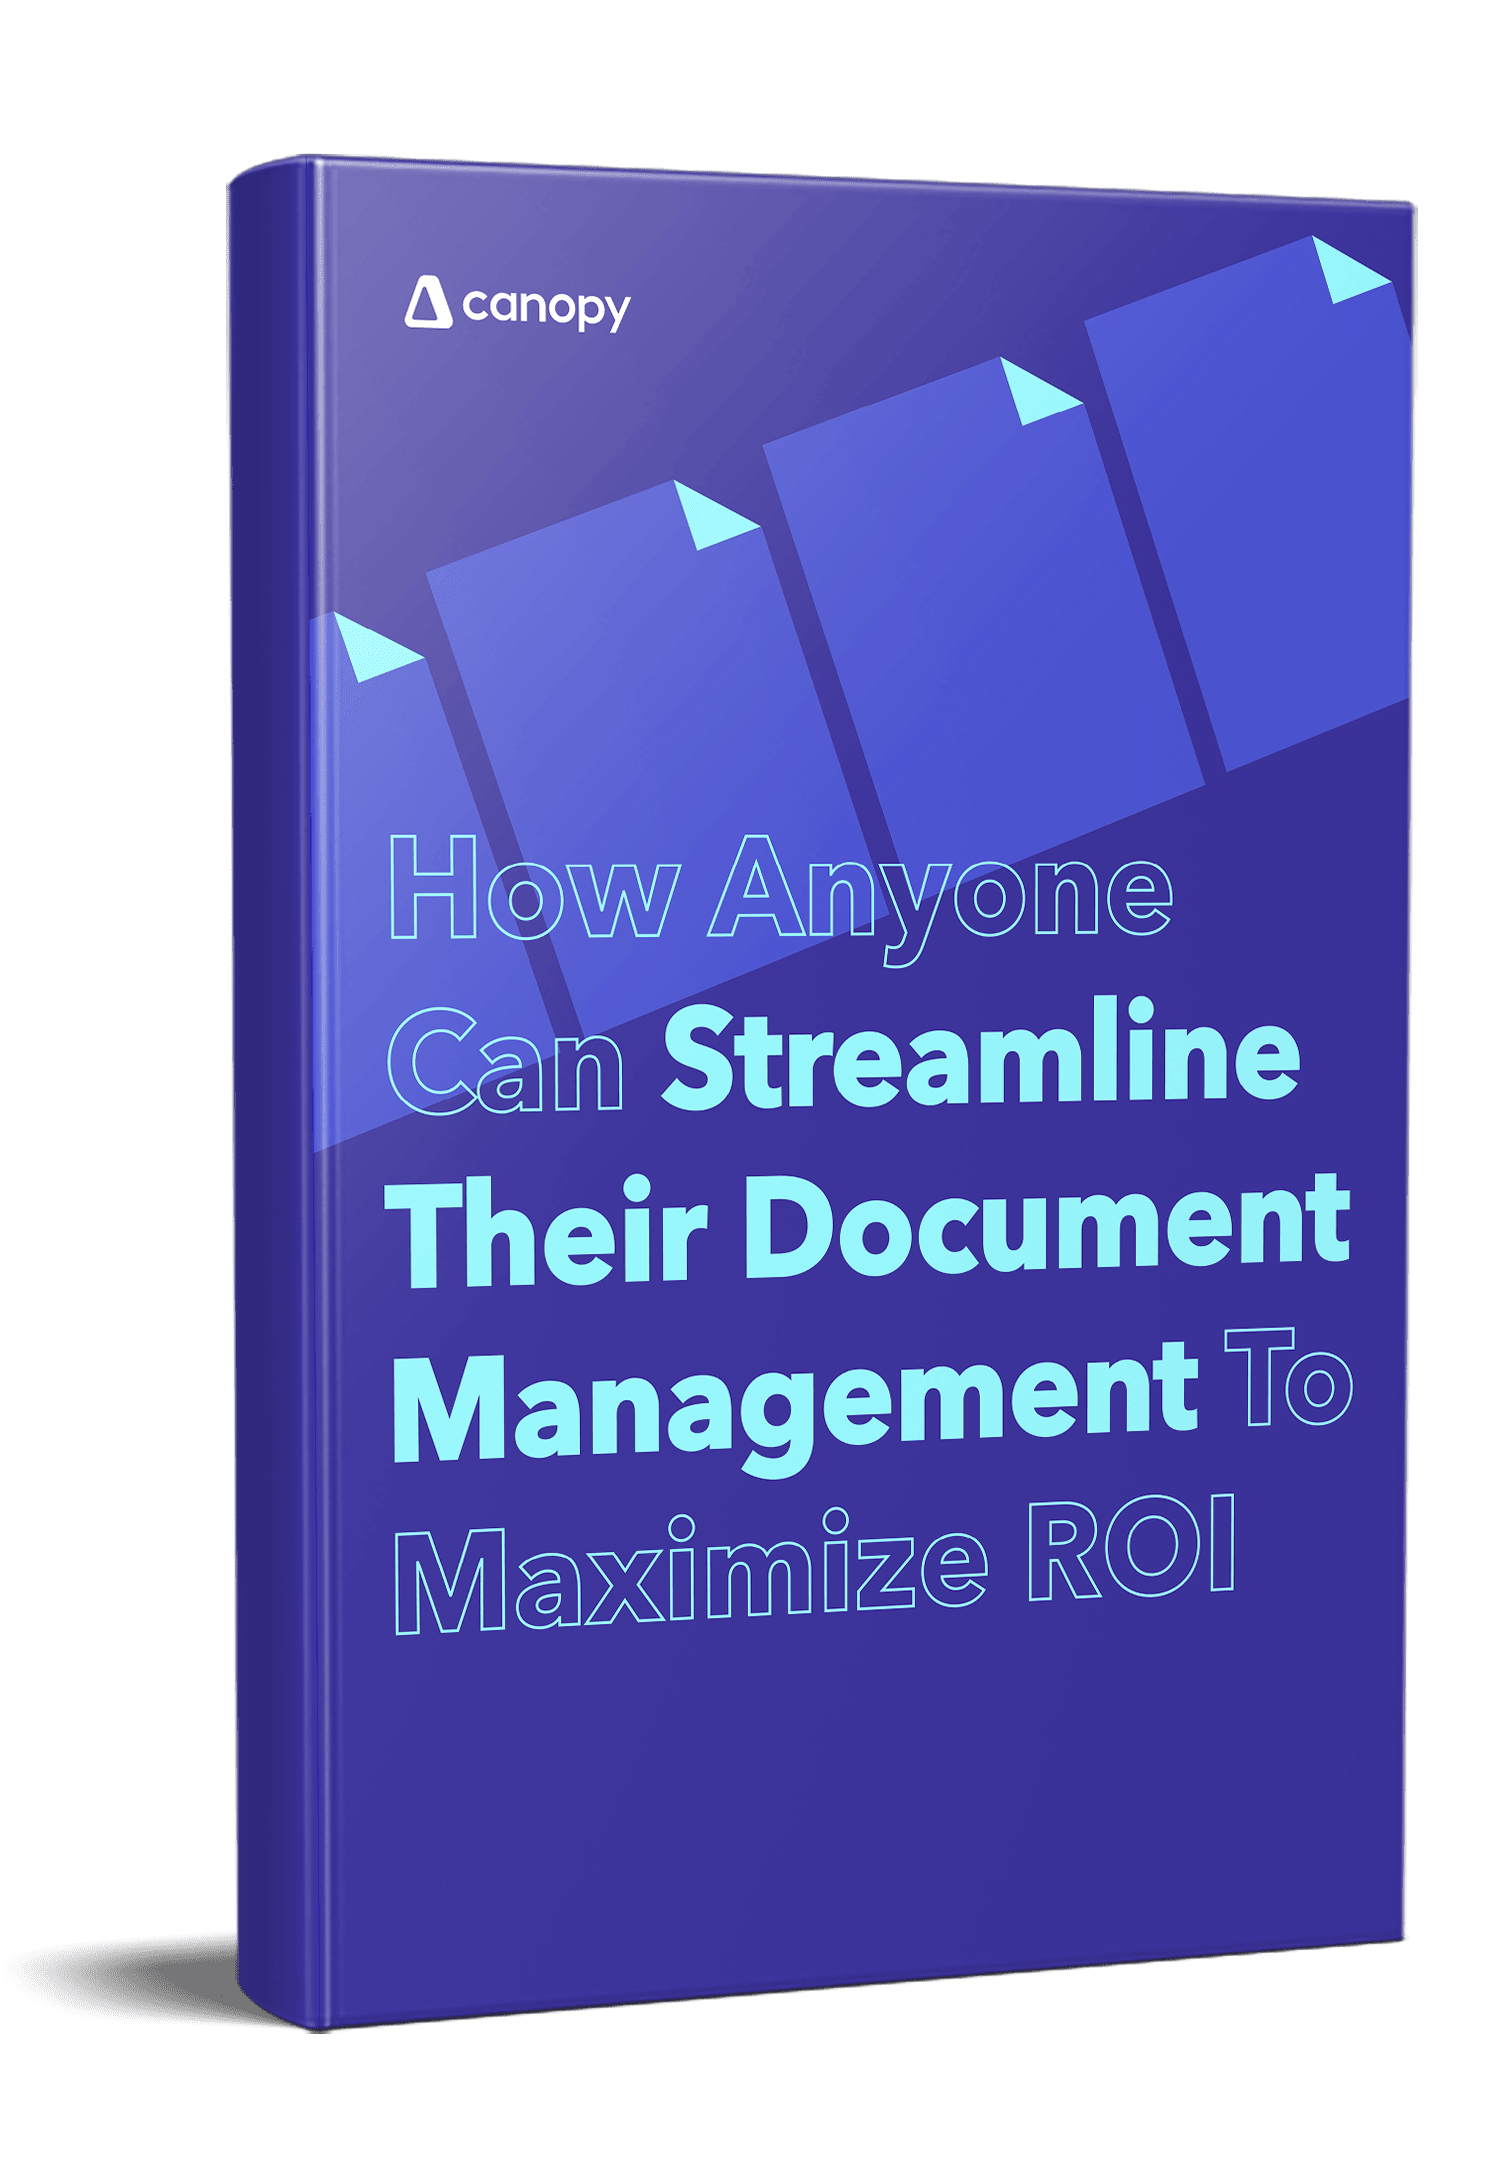 How Anyone Can Streamline Document Management To Maximize ROI